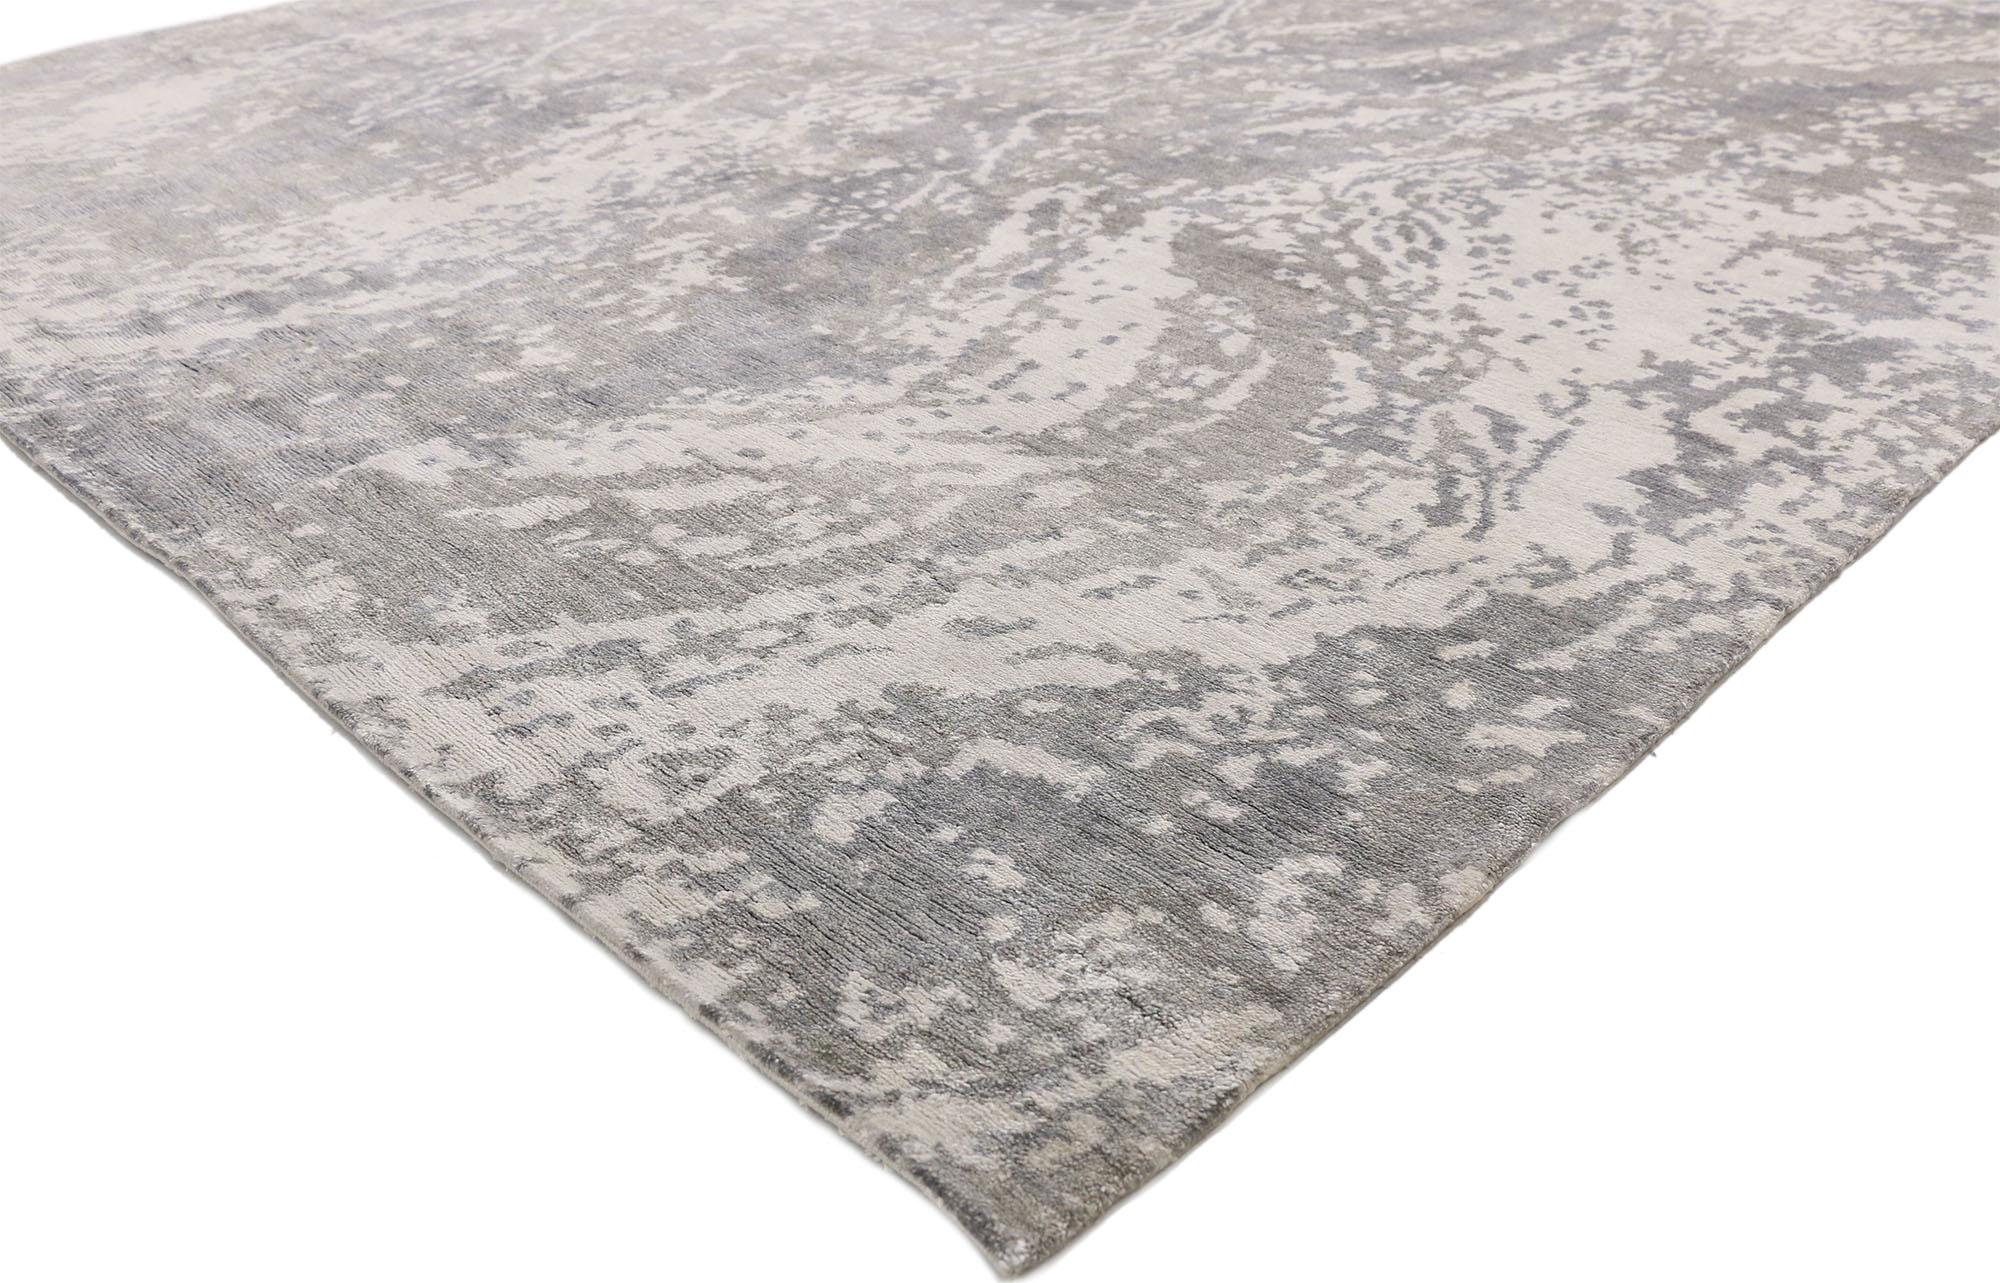 30468, new contemporary gray area rug with Grunge Art style. This hand knotted wool New contemporary gray area rug with abstract style is the epitome of relaxed luxury. Reflecting elements of rough hewn Grunge Art in a soft and mellow colorway, this